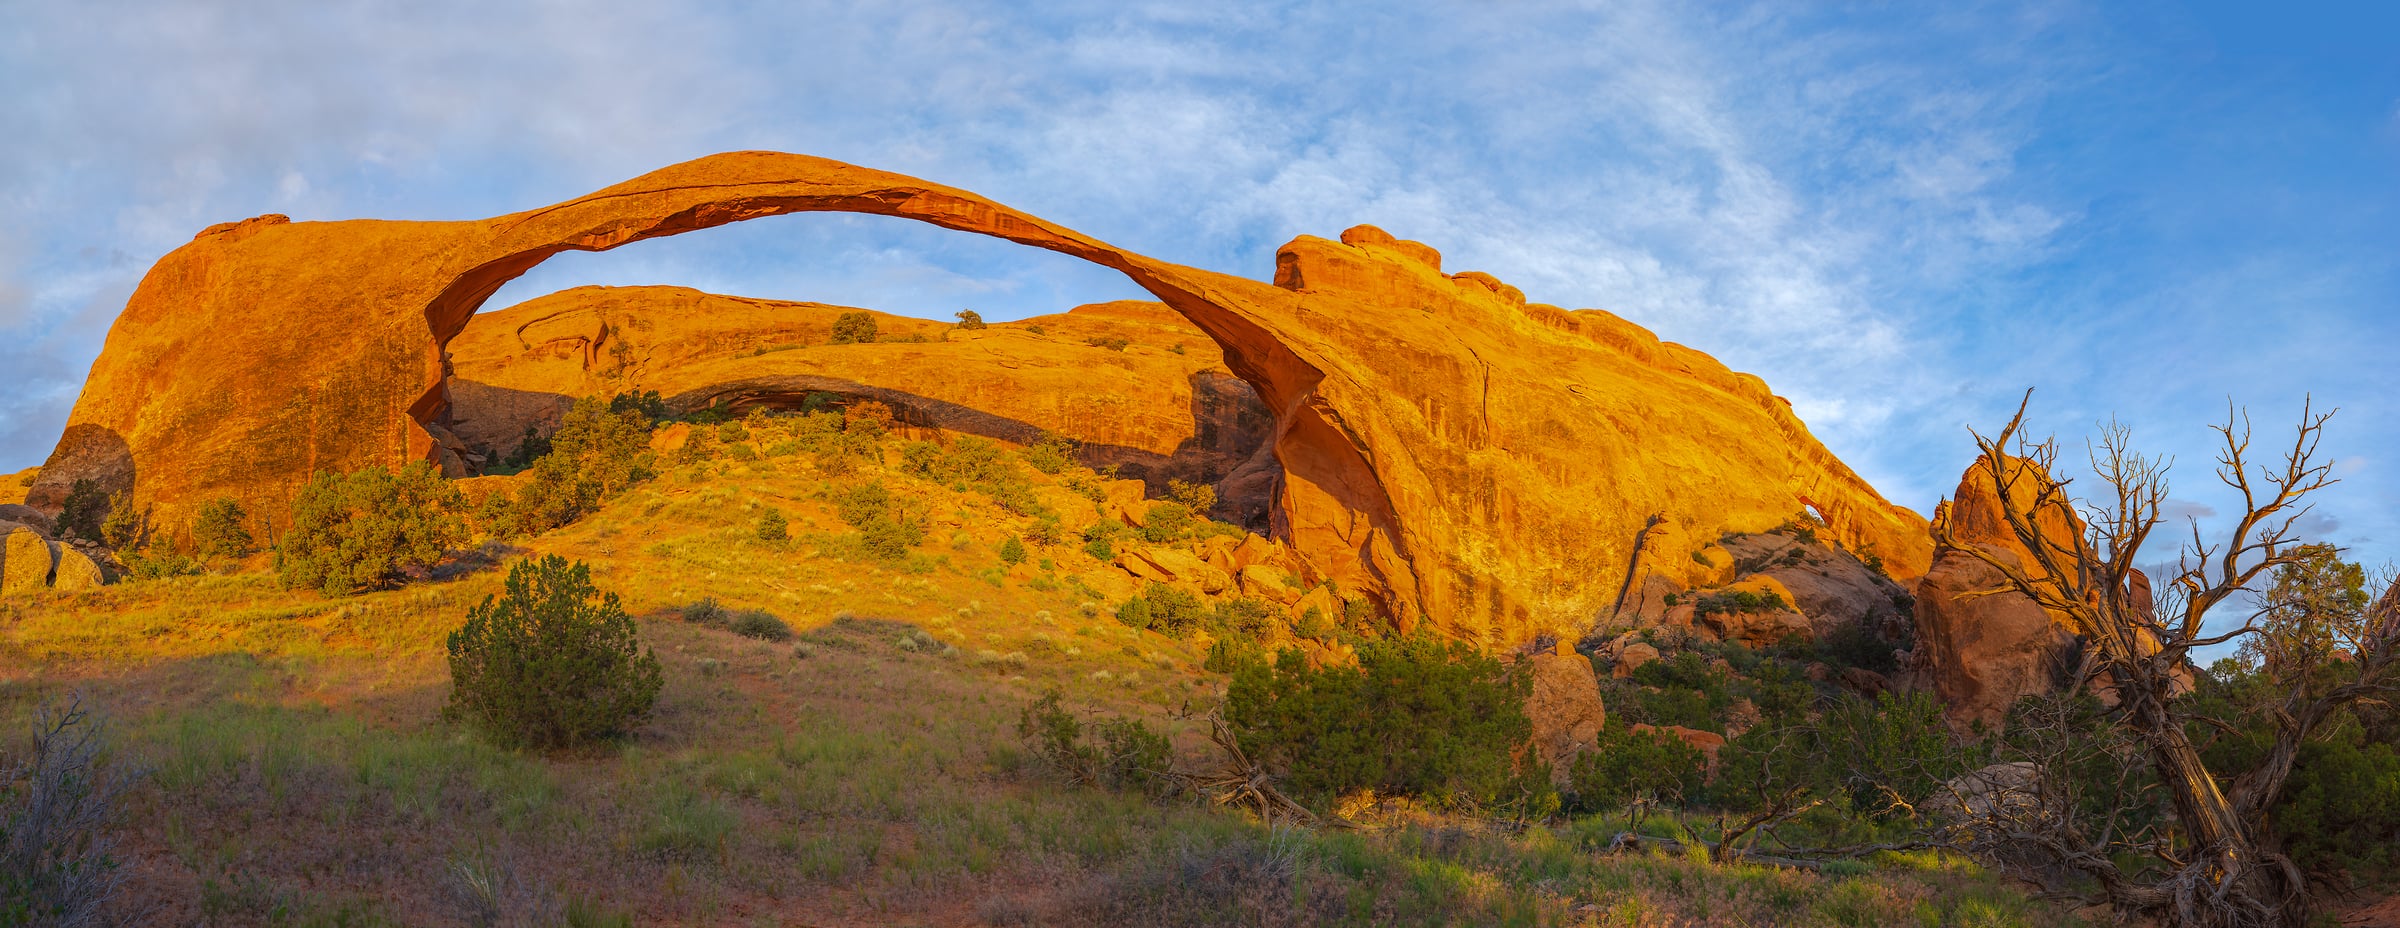 4,749 megapixels! A very high resolution, large-format VAST photo print of Landscape Arch in Arches National Park; photograph created by John Freeman in Arches National Park, Utah.